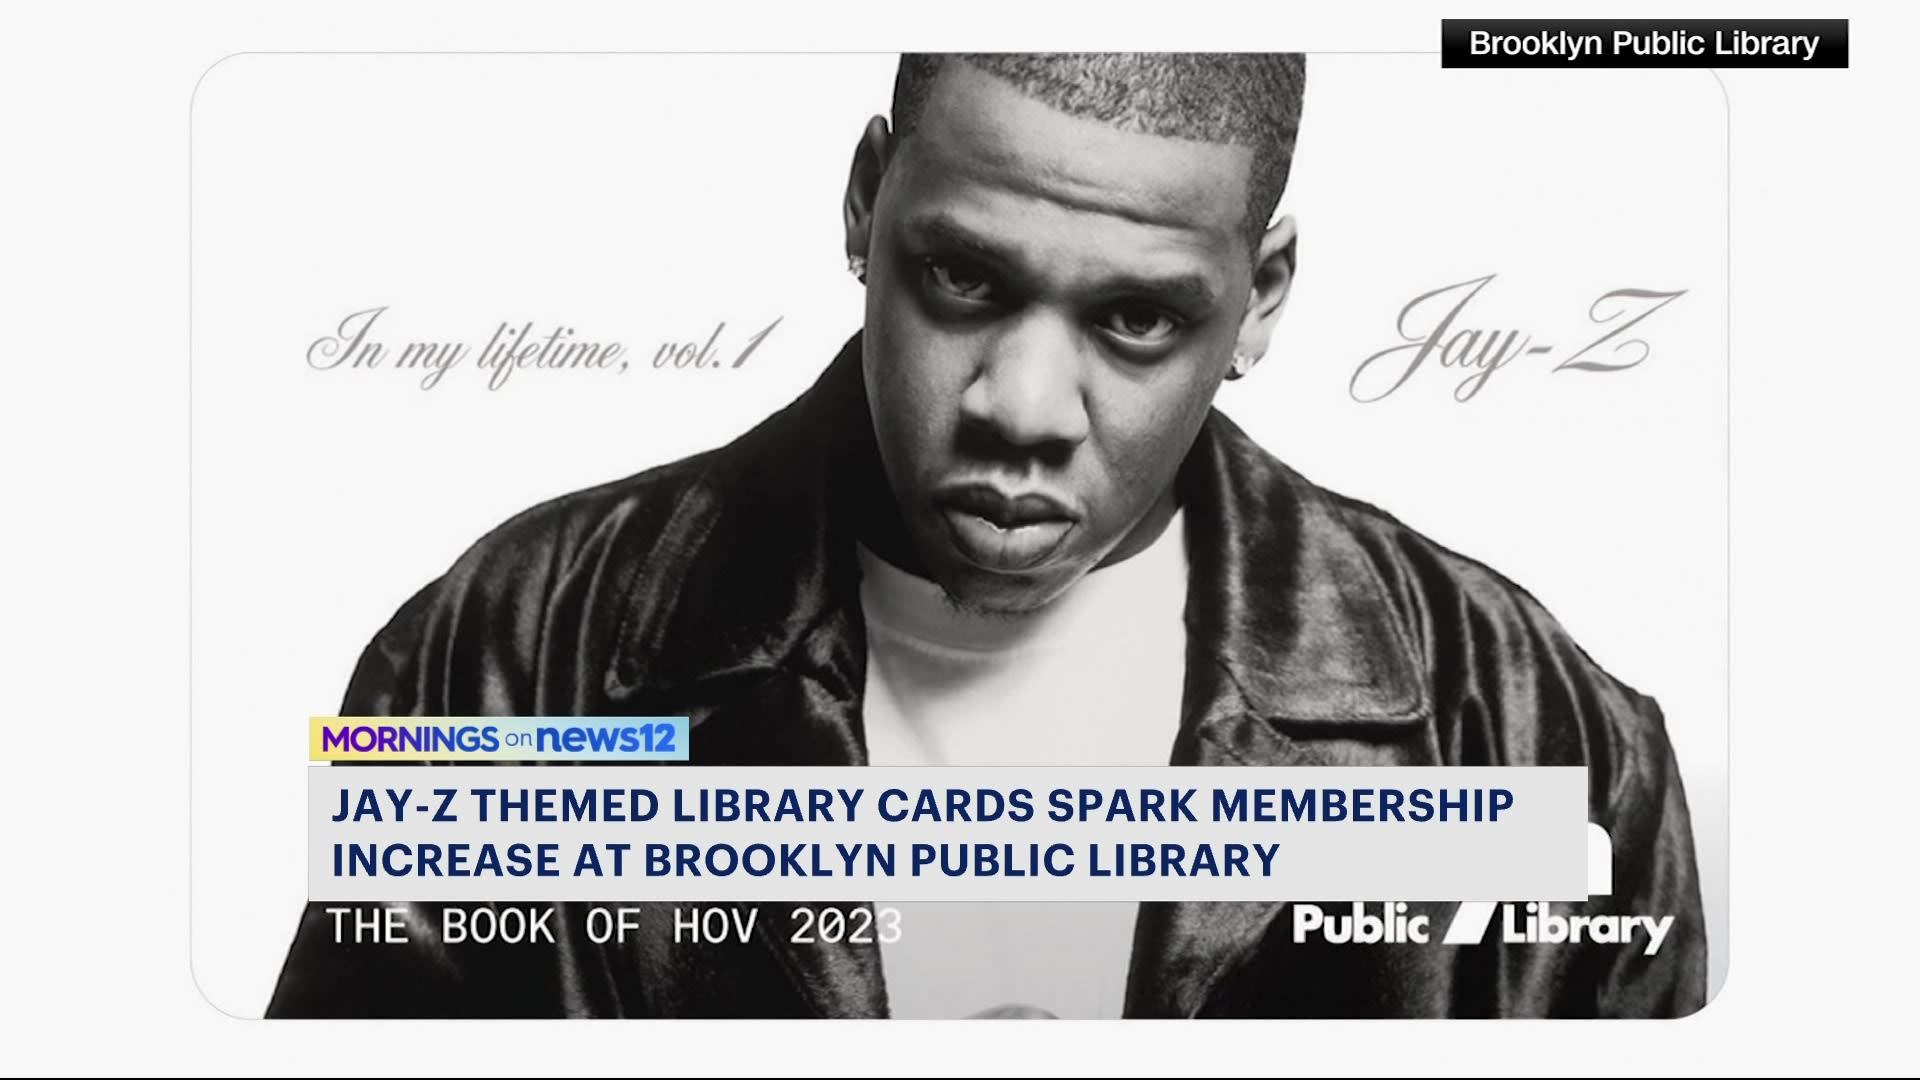 Jay-Z-themed library cards spark increase in Brooklyn Public Library  memberships